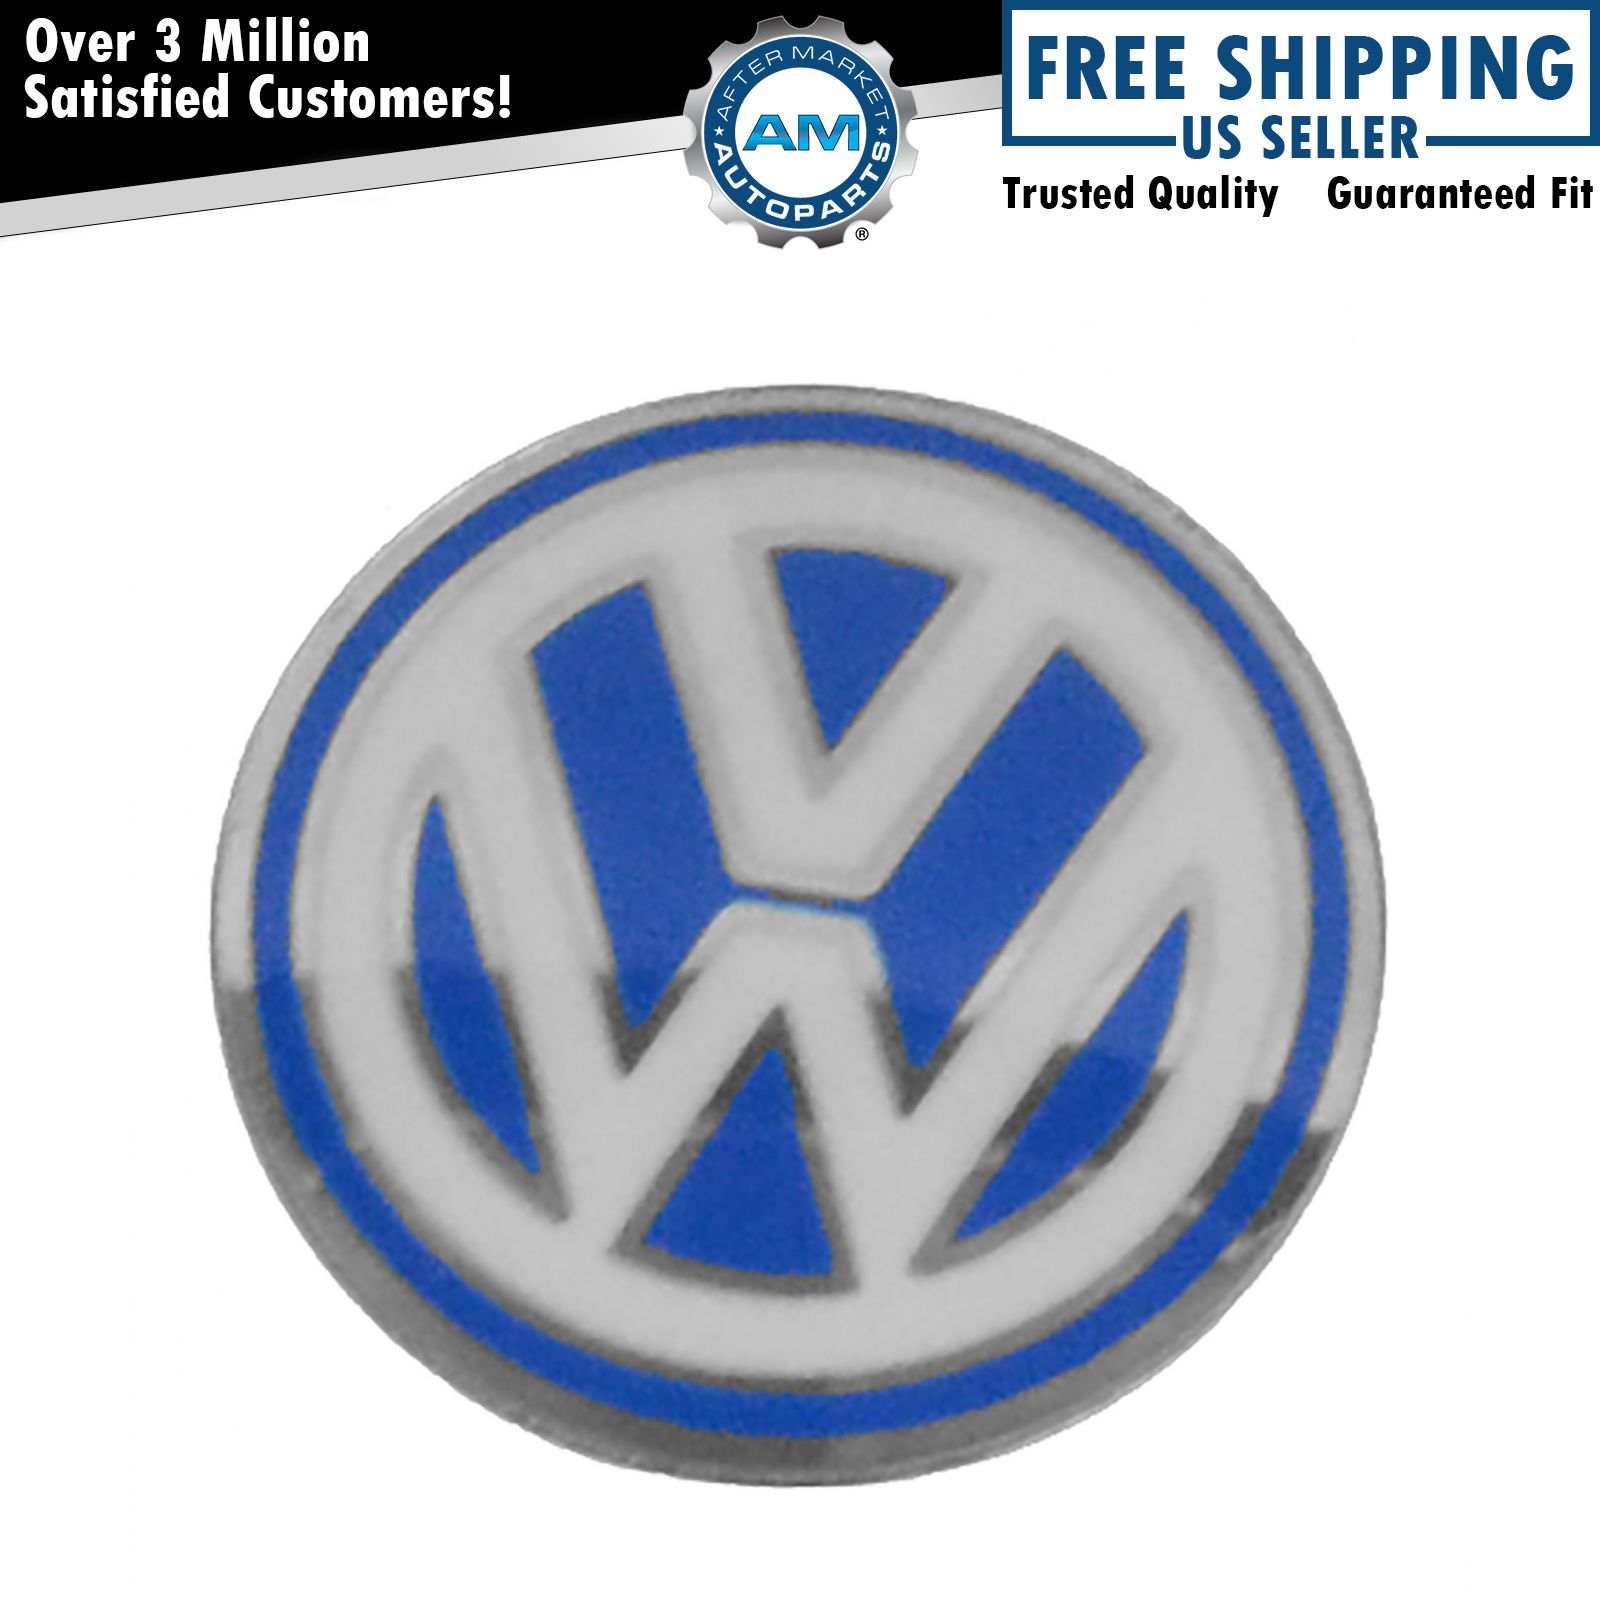 OEM 3B0-837-891-09Z Key Fob VW Emblem Replacement for Volkswagen New